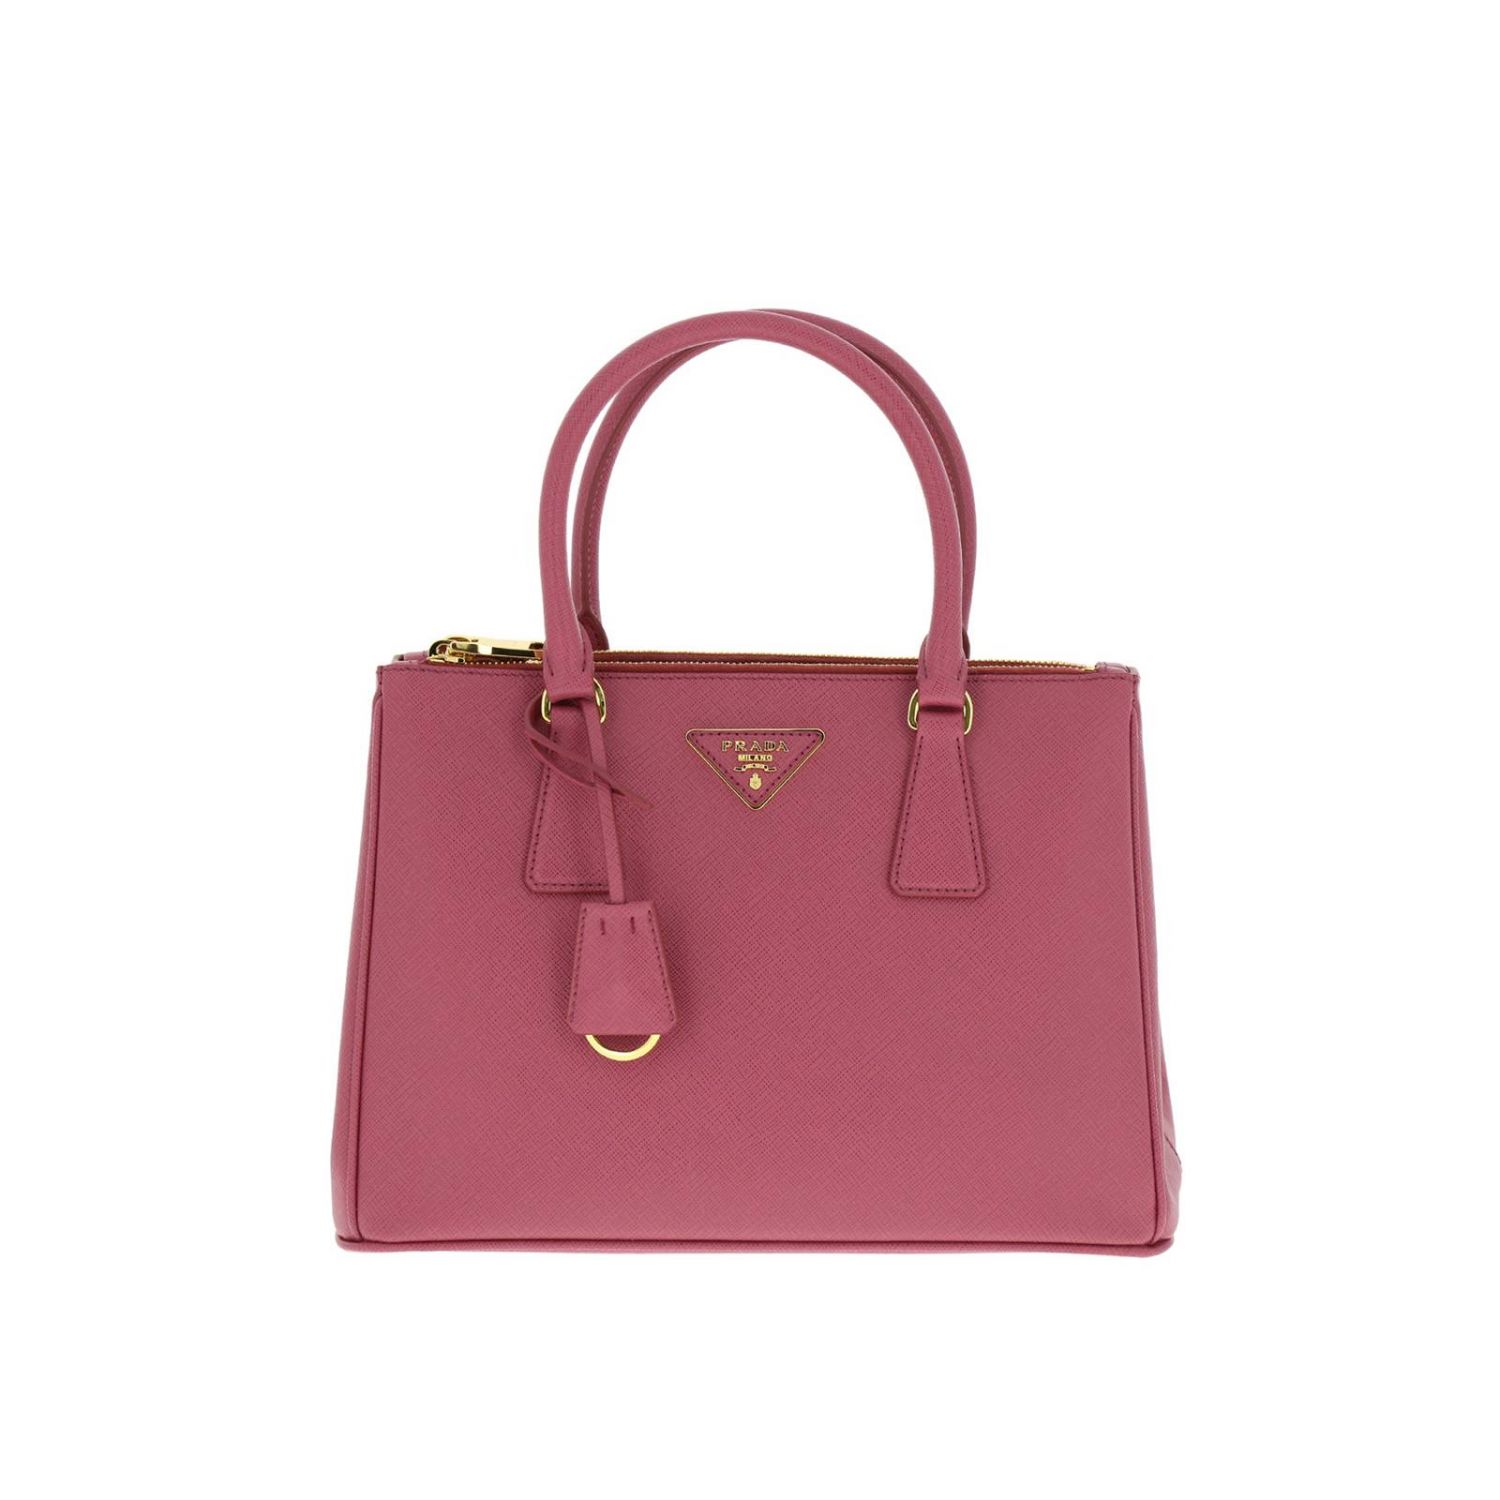 PRADA: Pada Galleria shopping bag in saffiano leather with removable ...